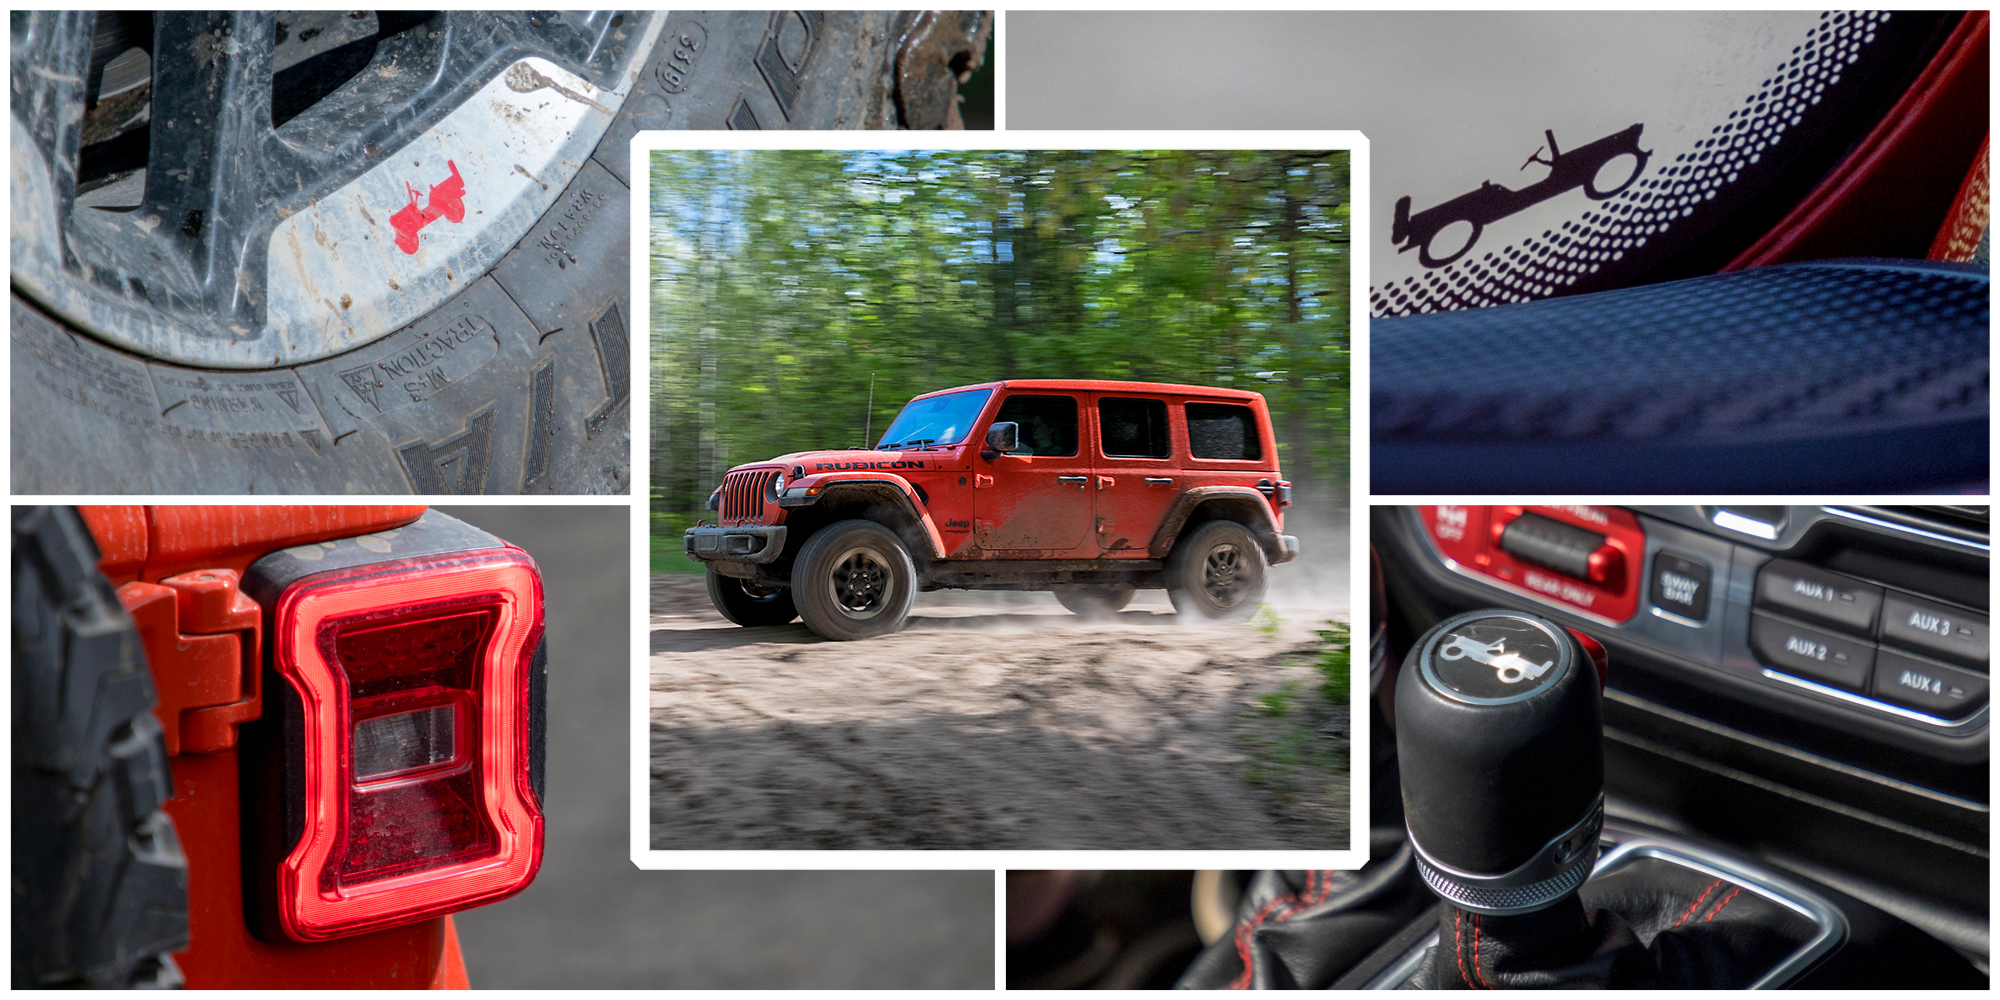 Every Easter Egg on the Jeep Wrangler Unlimited Rubicon EcoDiesel